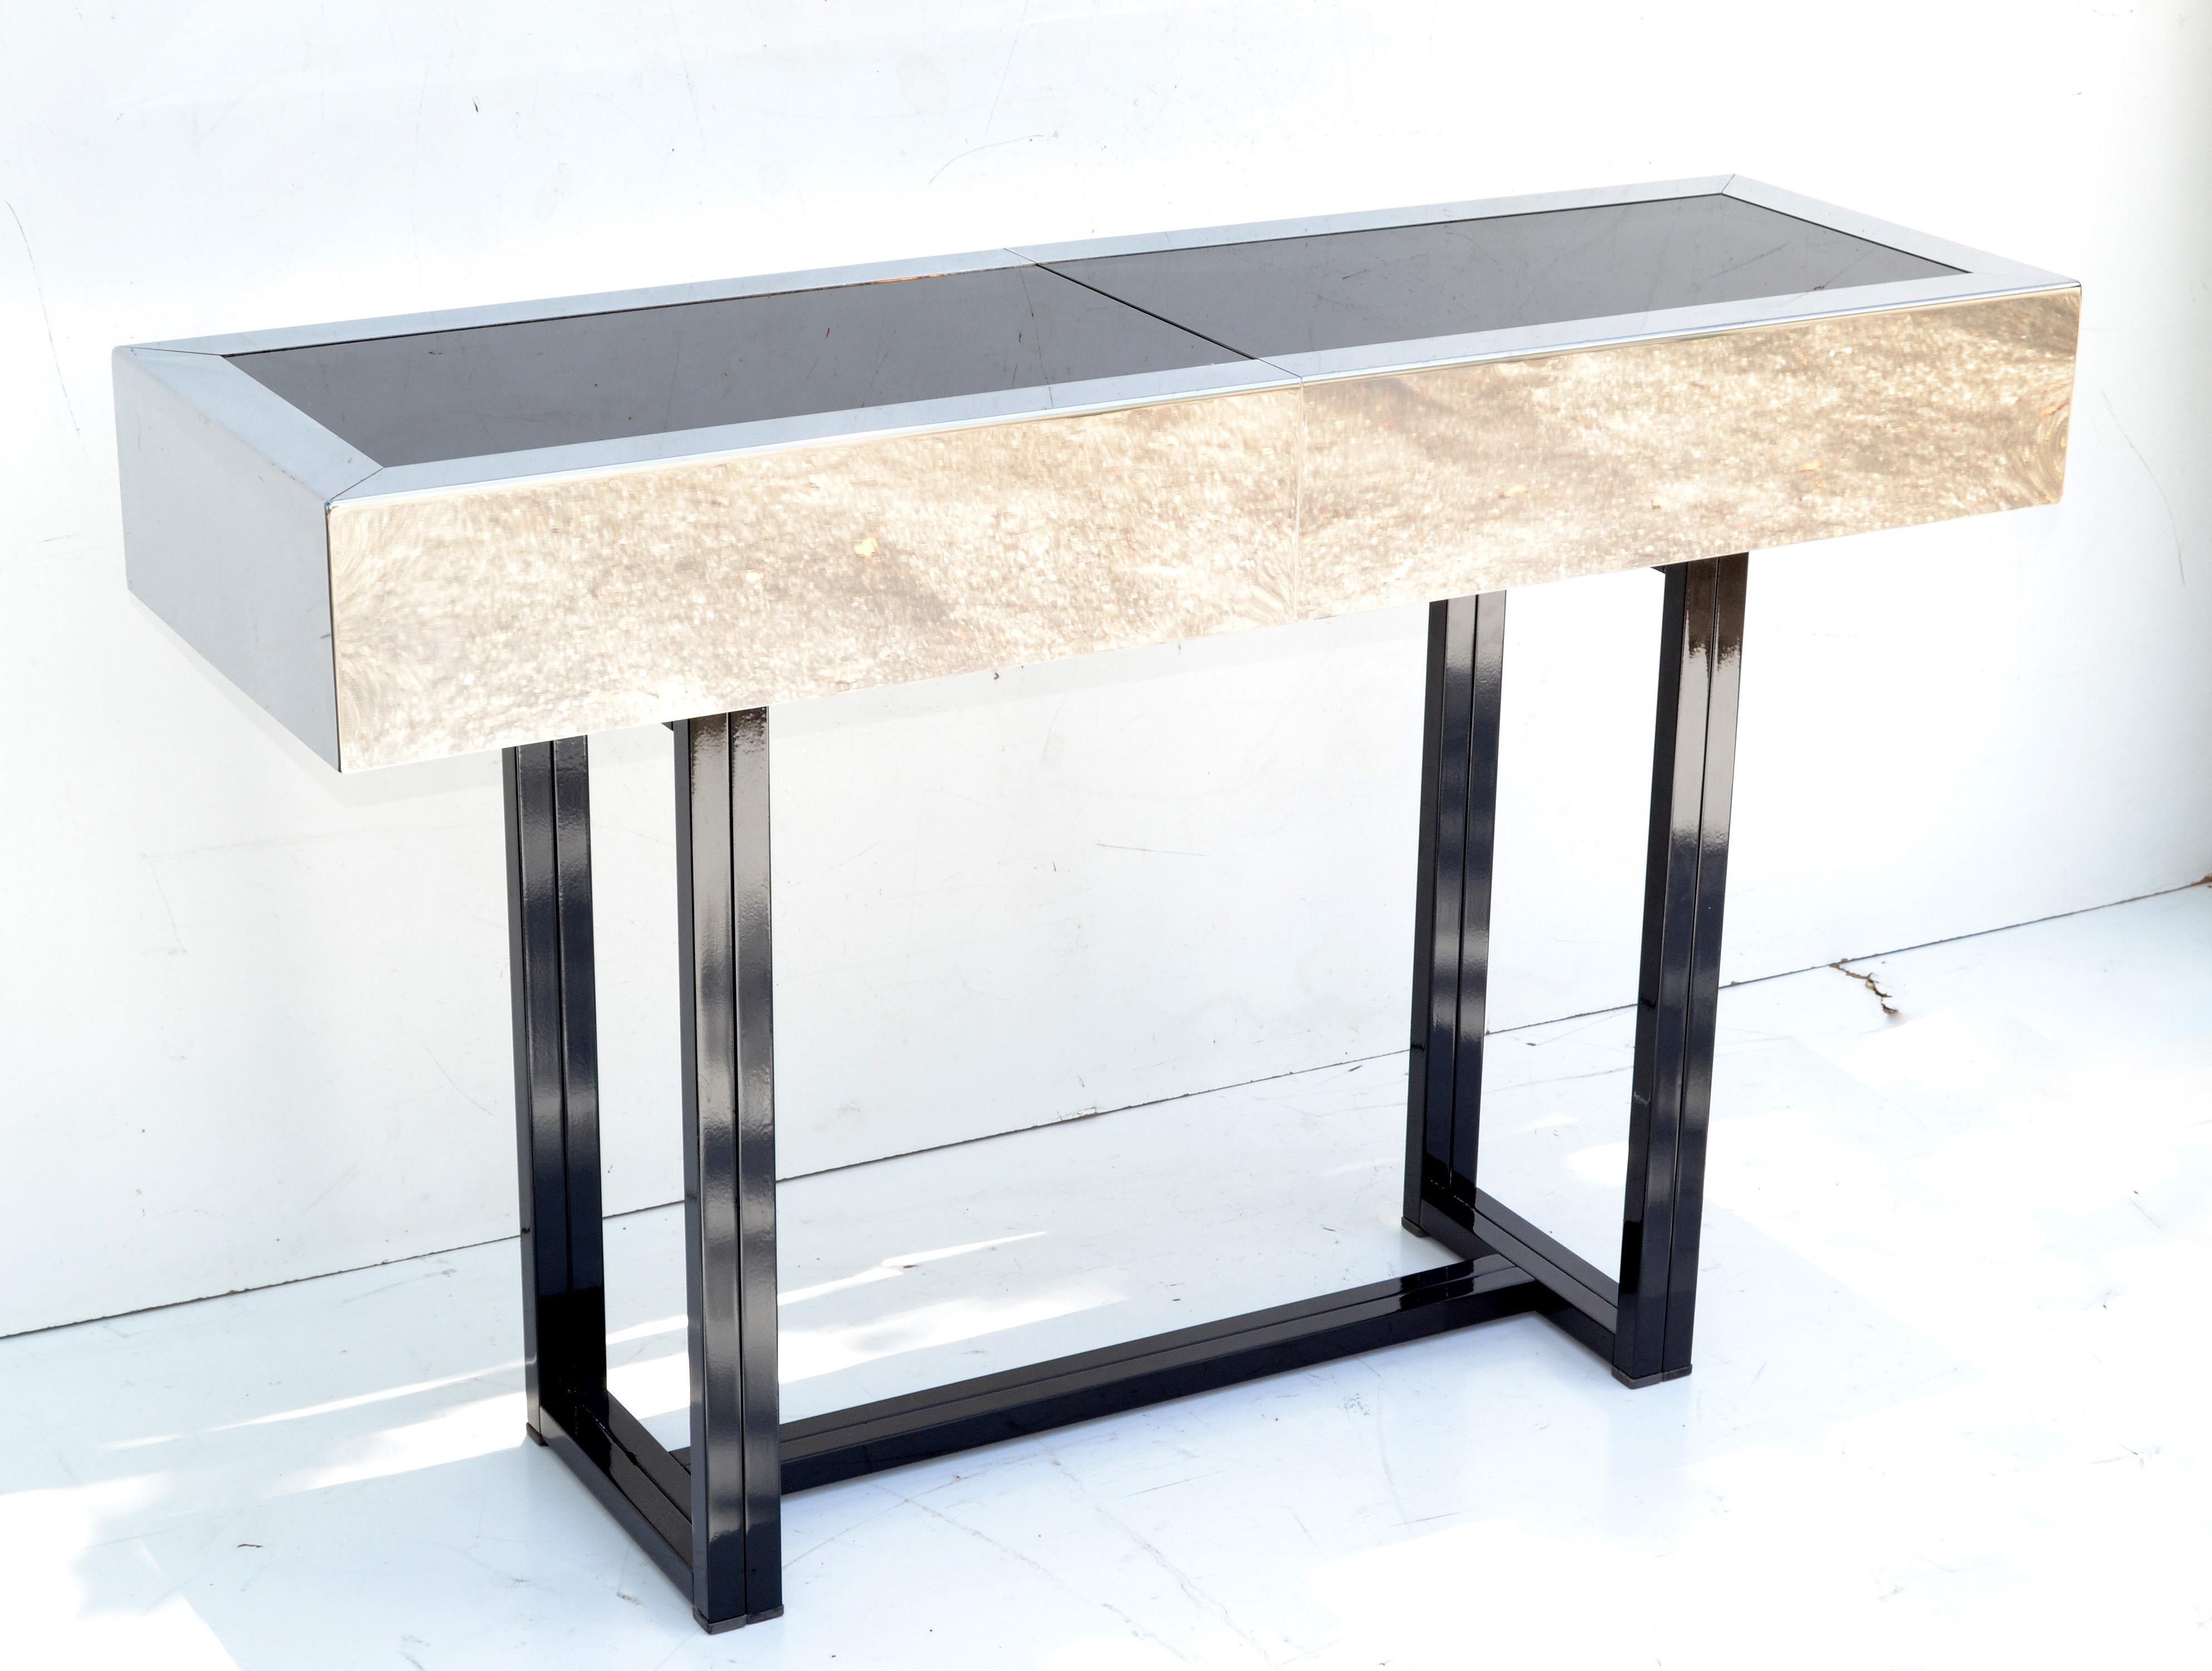 Very elegant bar console table Willy Rizzo Style made in Italy, circa 1970s.
Sturdy black powder coated steel frame with brushed steel bar frame & polished Chrome compartment.
Black mirrored glass top.
Mirrored glass measures: 43.25 x 11